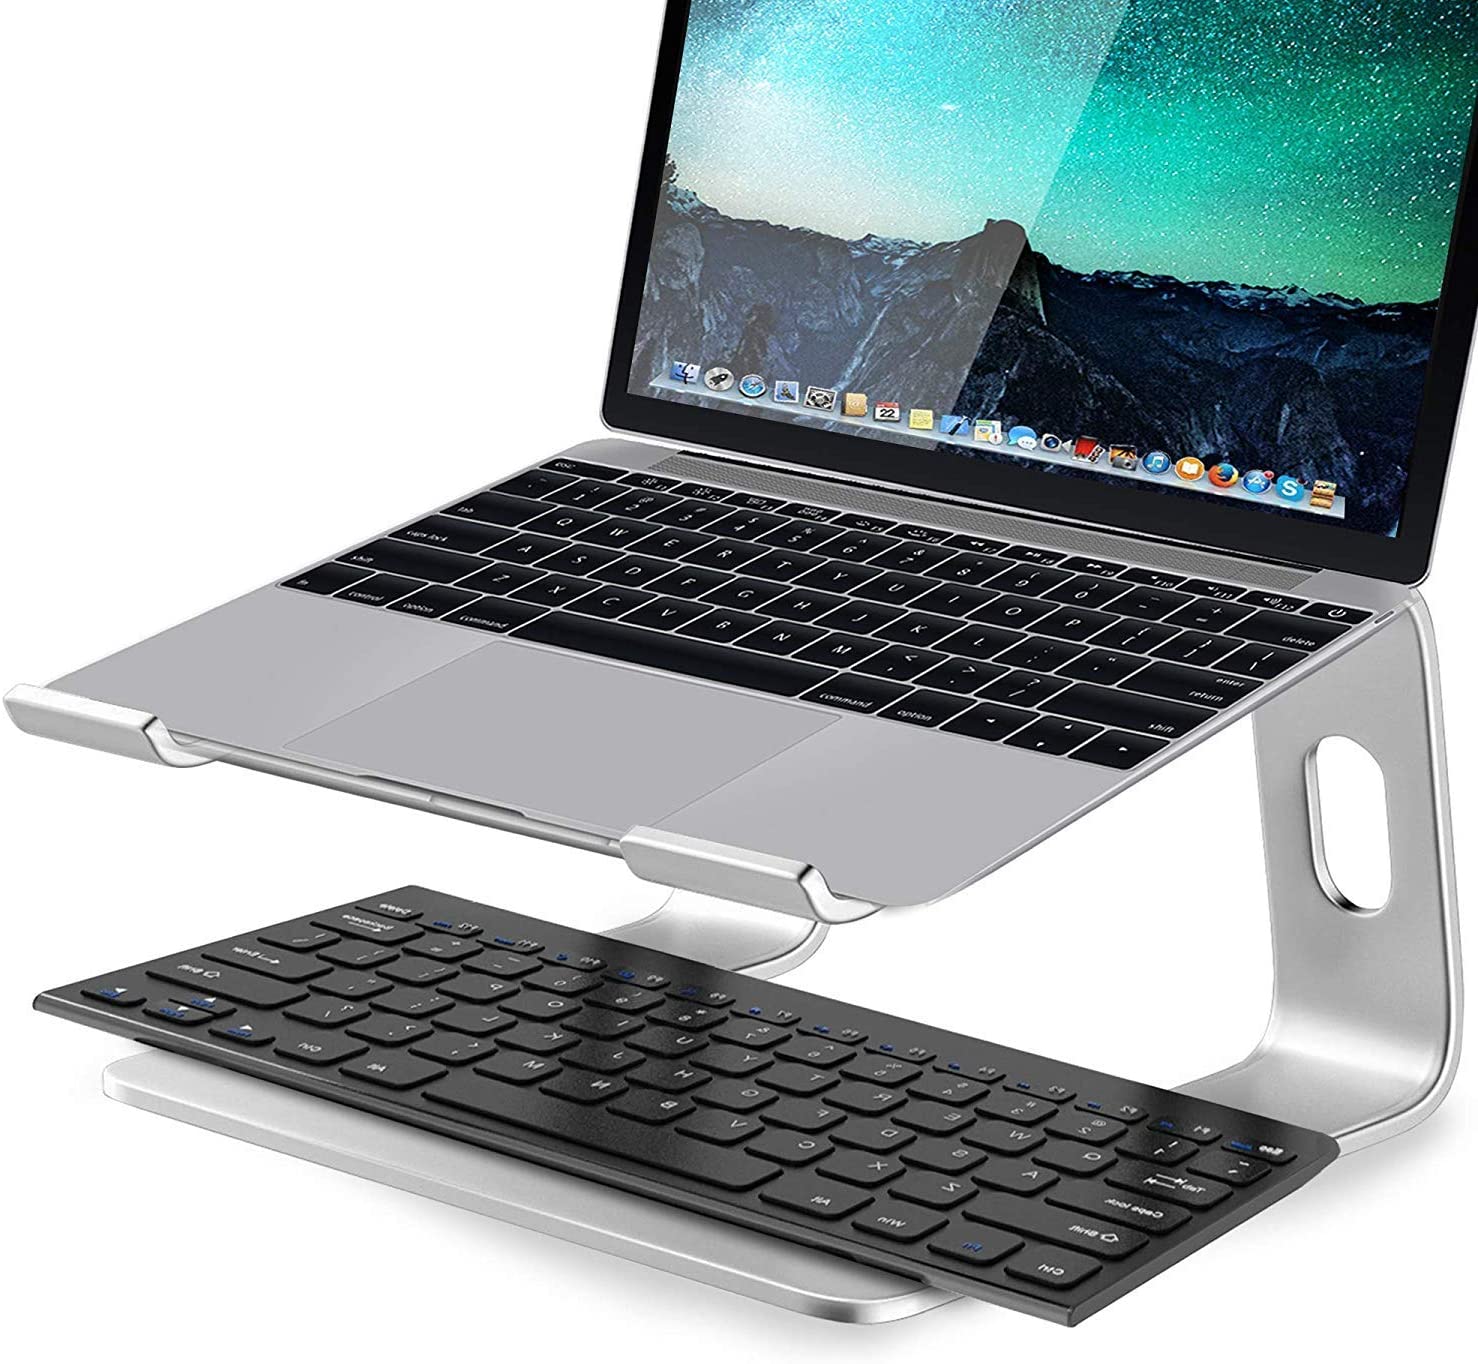 HF-LSH: Aluminum Laptop Stand for Desk Compatible with Mac MacBook Pro Air Apple Notebook, Portable Holder - Click Image to Close